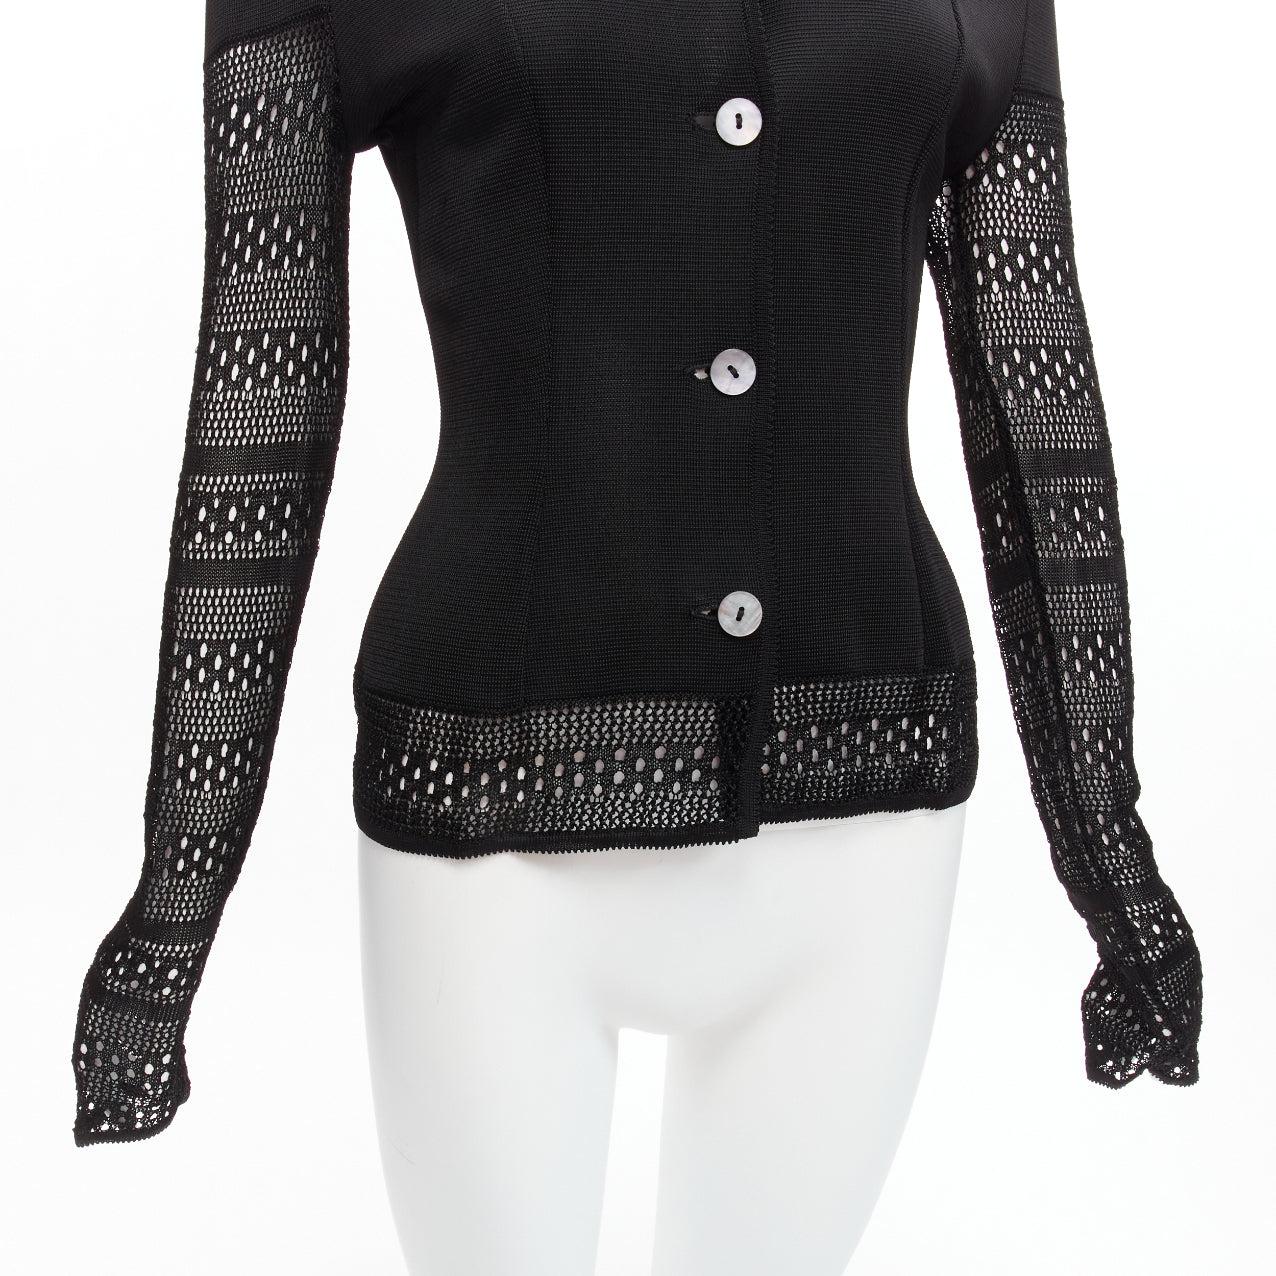 JOHN GALLIANO Vintage black open knit crochet sleeve layered cardigan S
Reference: TGAS/D00547
Brand: John Galliano
Designer: John Galliano
Material: Viscose
Color: Black
Pattern: Solid
Closure: Button
Made in: Italy

CONDITION:
Condition: